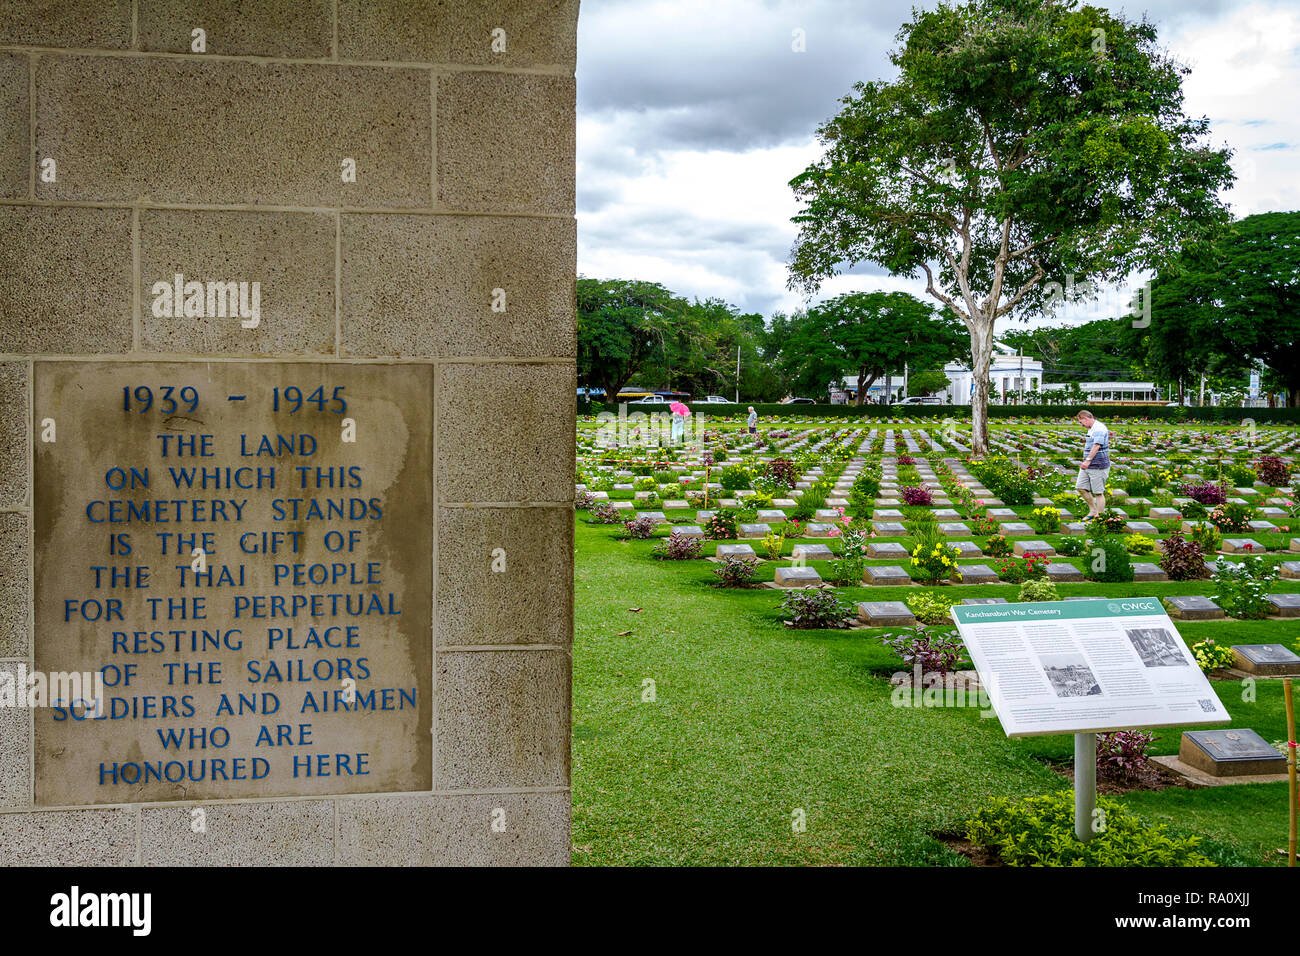 Wall inscription and picture of grave sites of war cemetary. Stock Photo